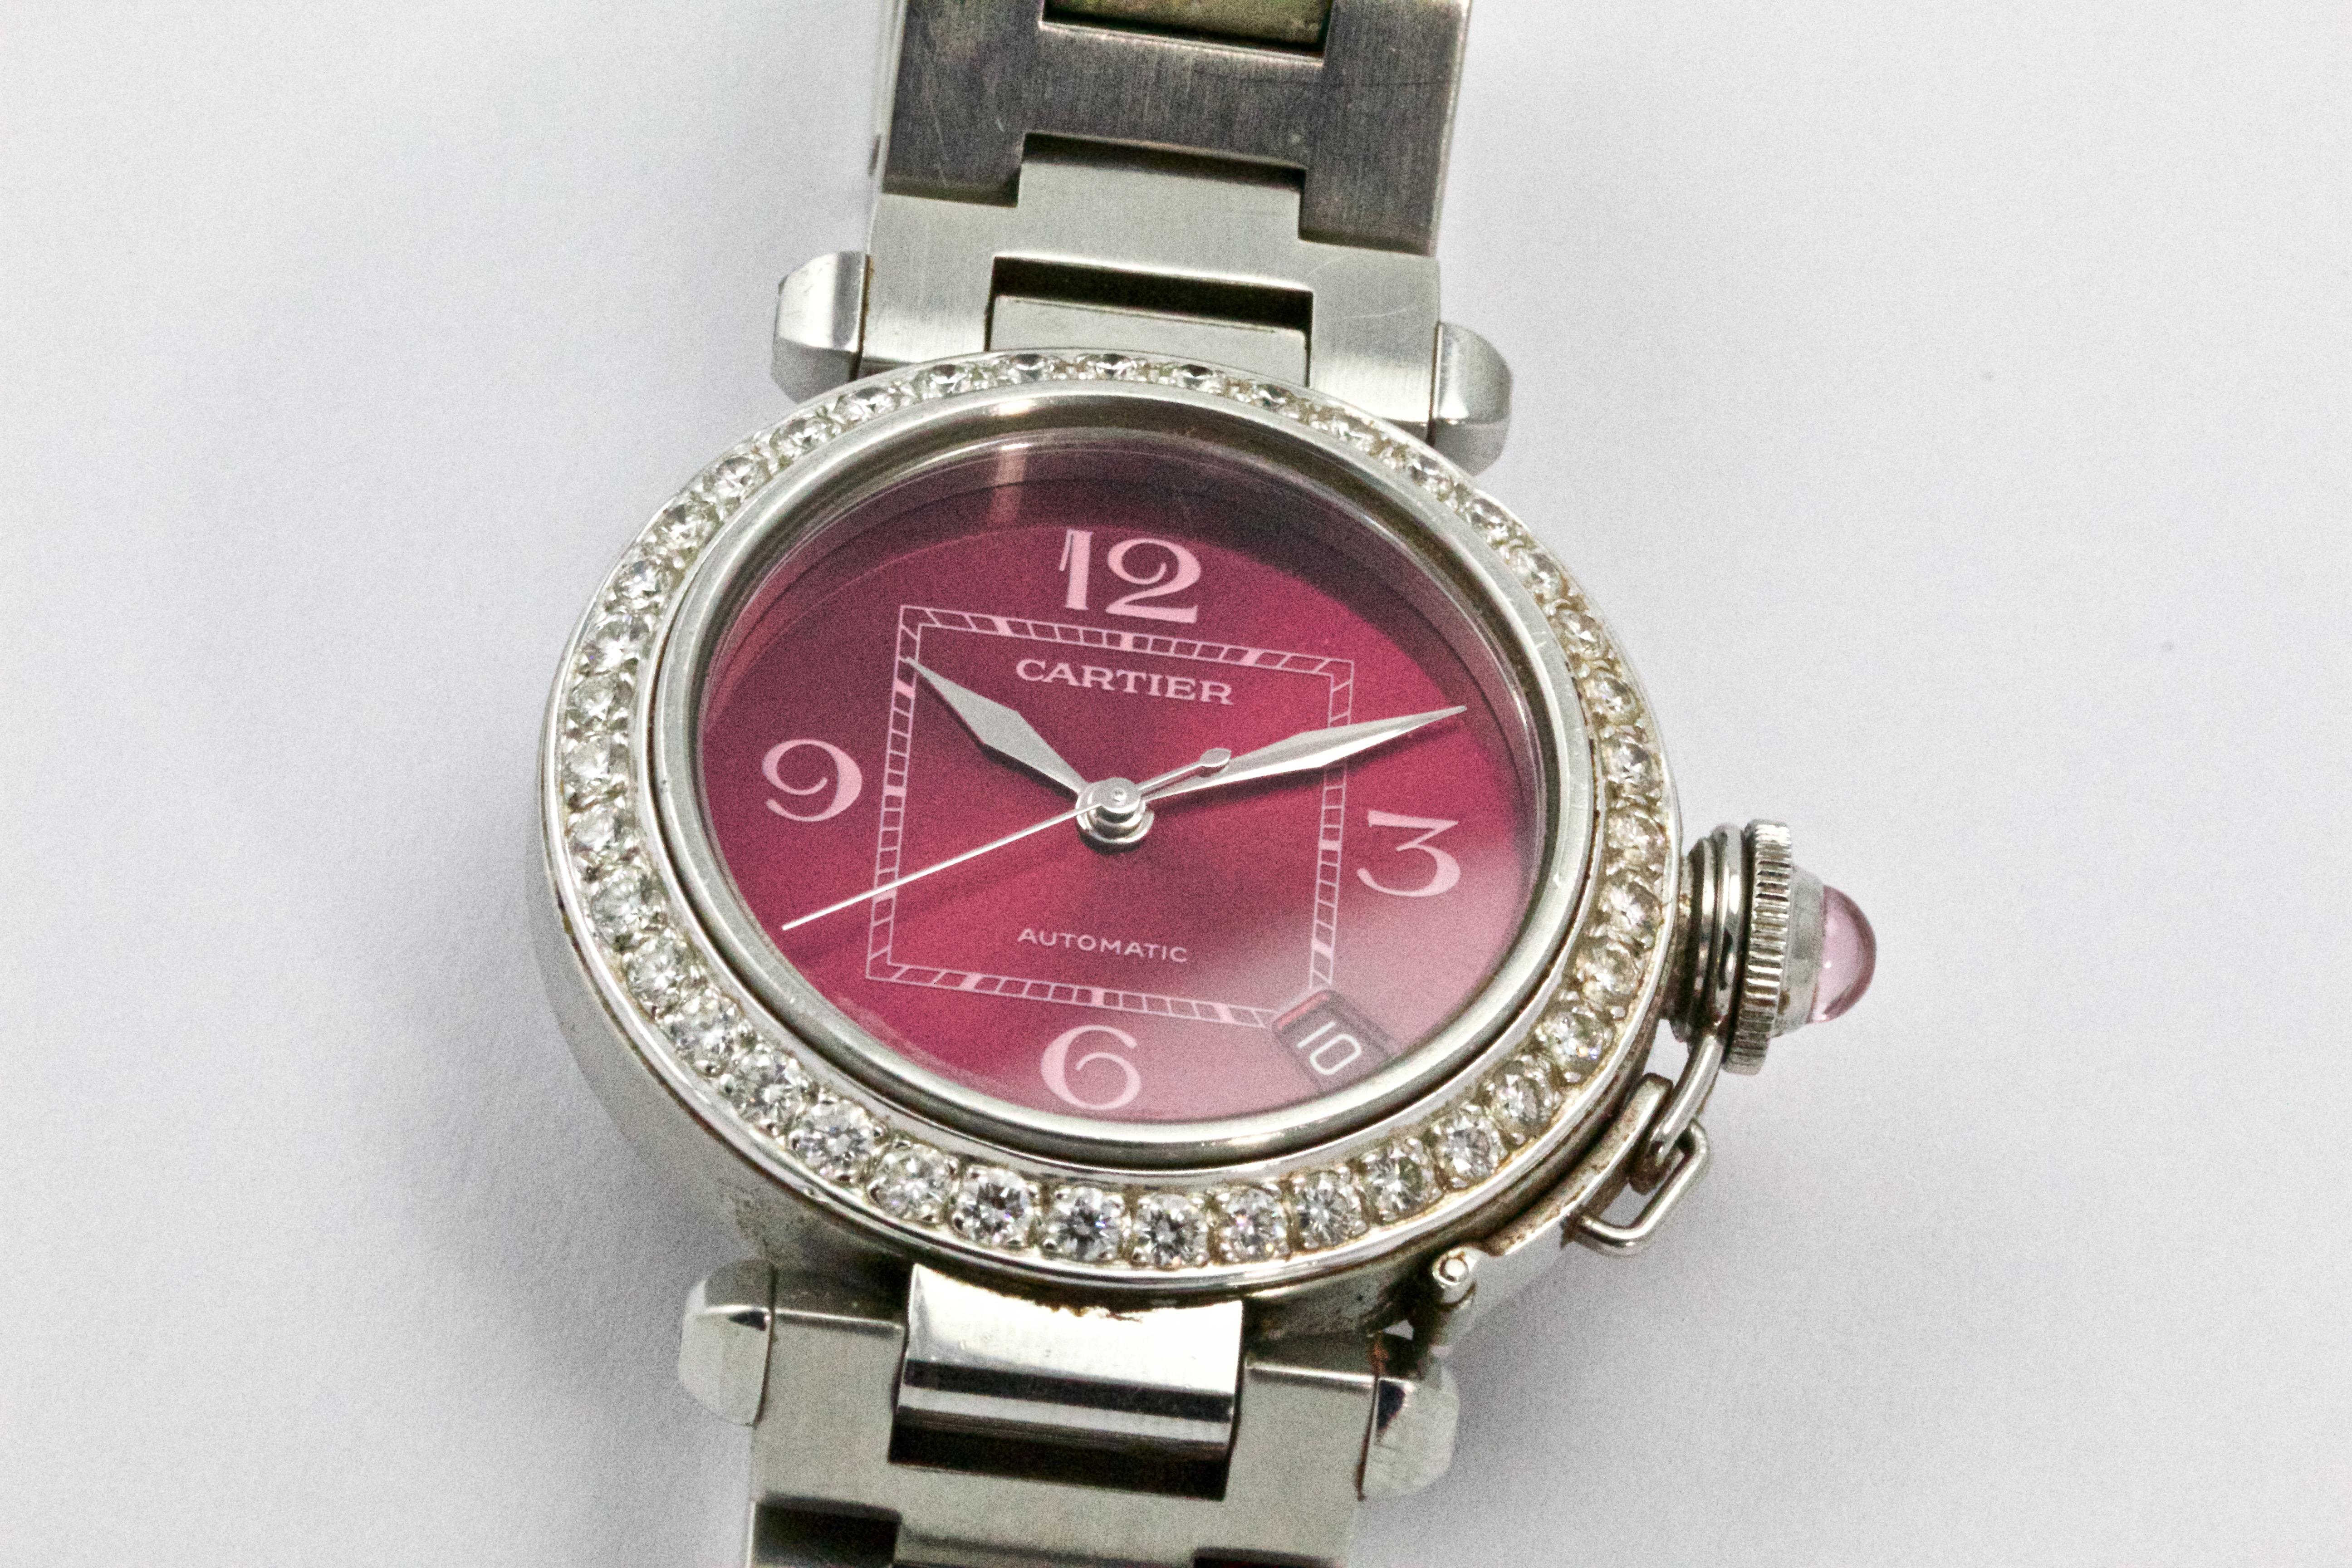 A fine quality Pasha de Cartier ladies Wrist Watch, stainless steel water resistant case with  Diamond Bezel, 38 Round Brilliant cut Diamonds totalling 1.52 carats. Complete with an automatic, self winding movement, a bright pearlescent pink/purple